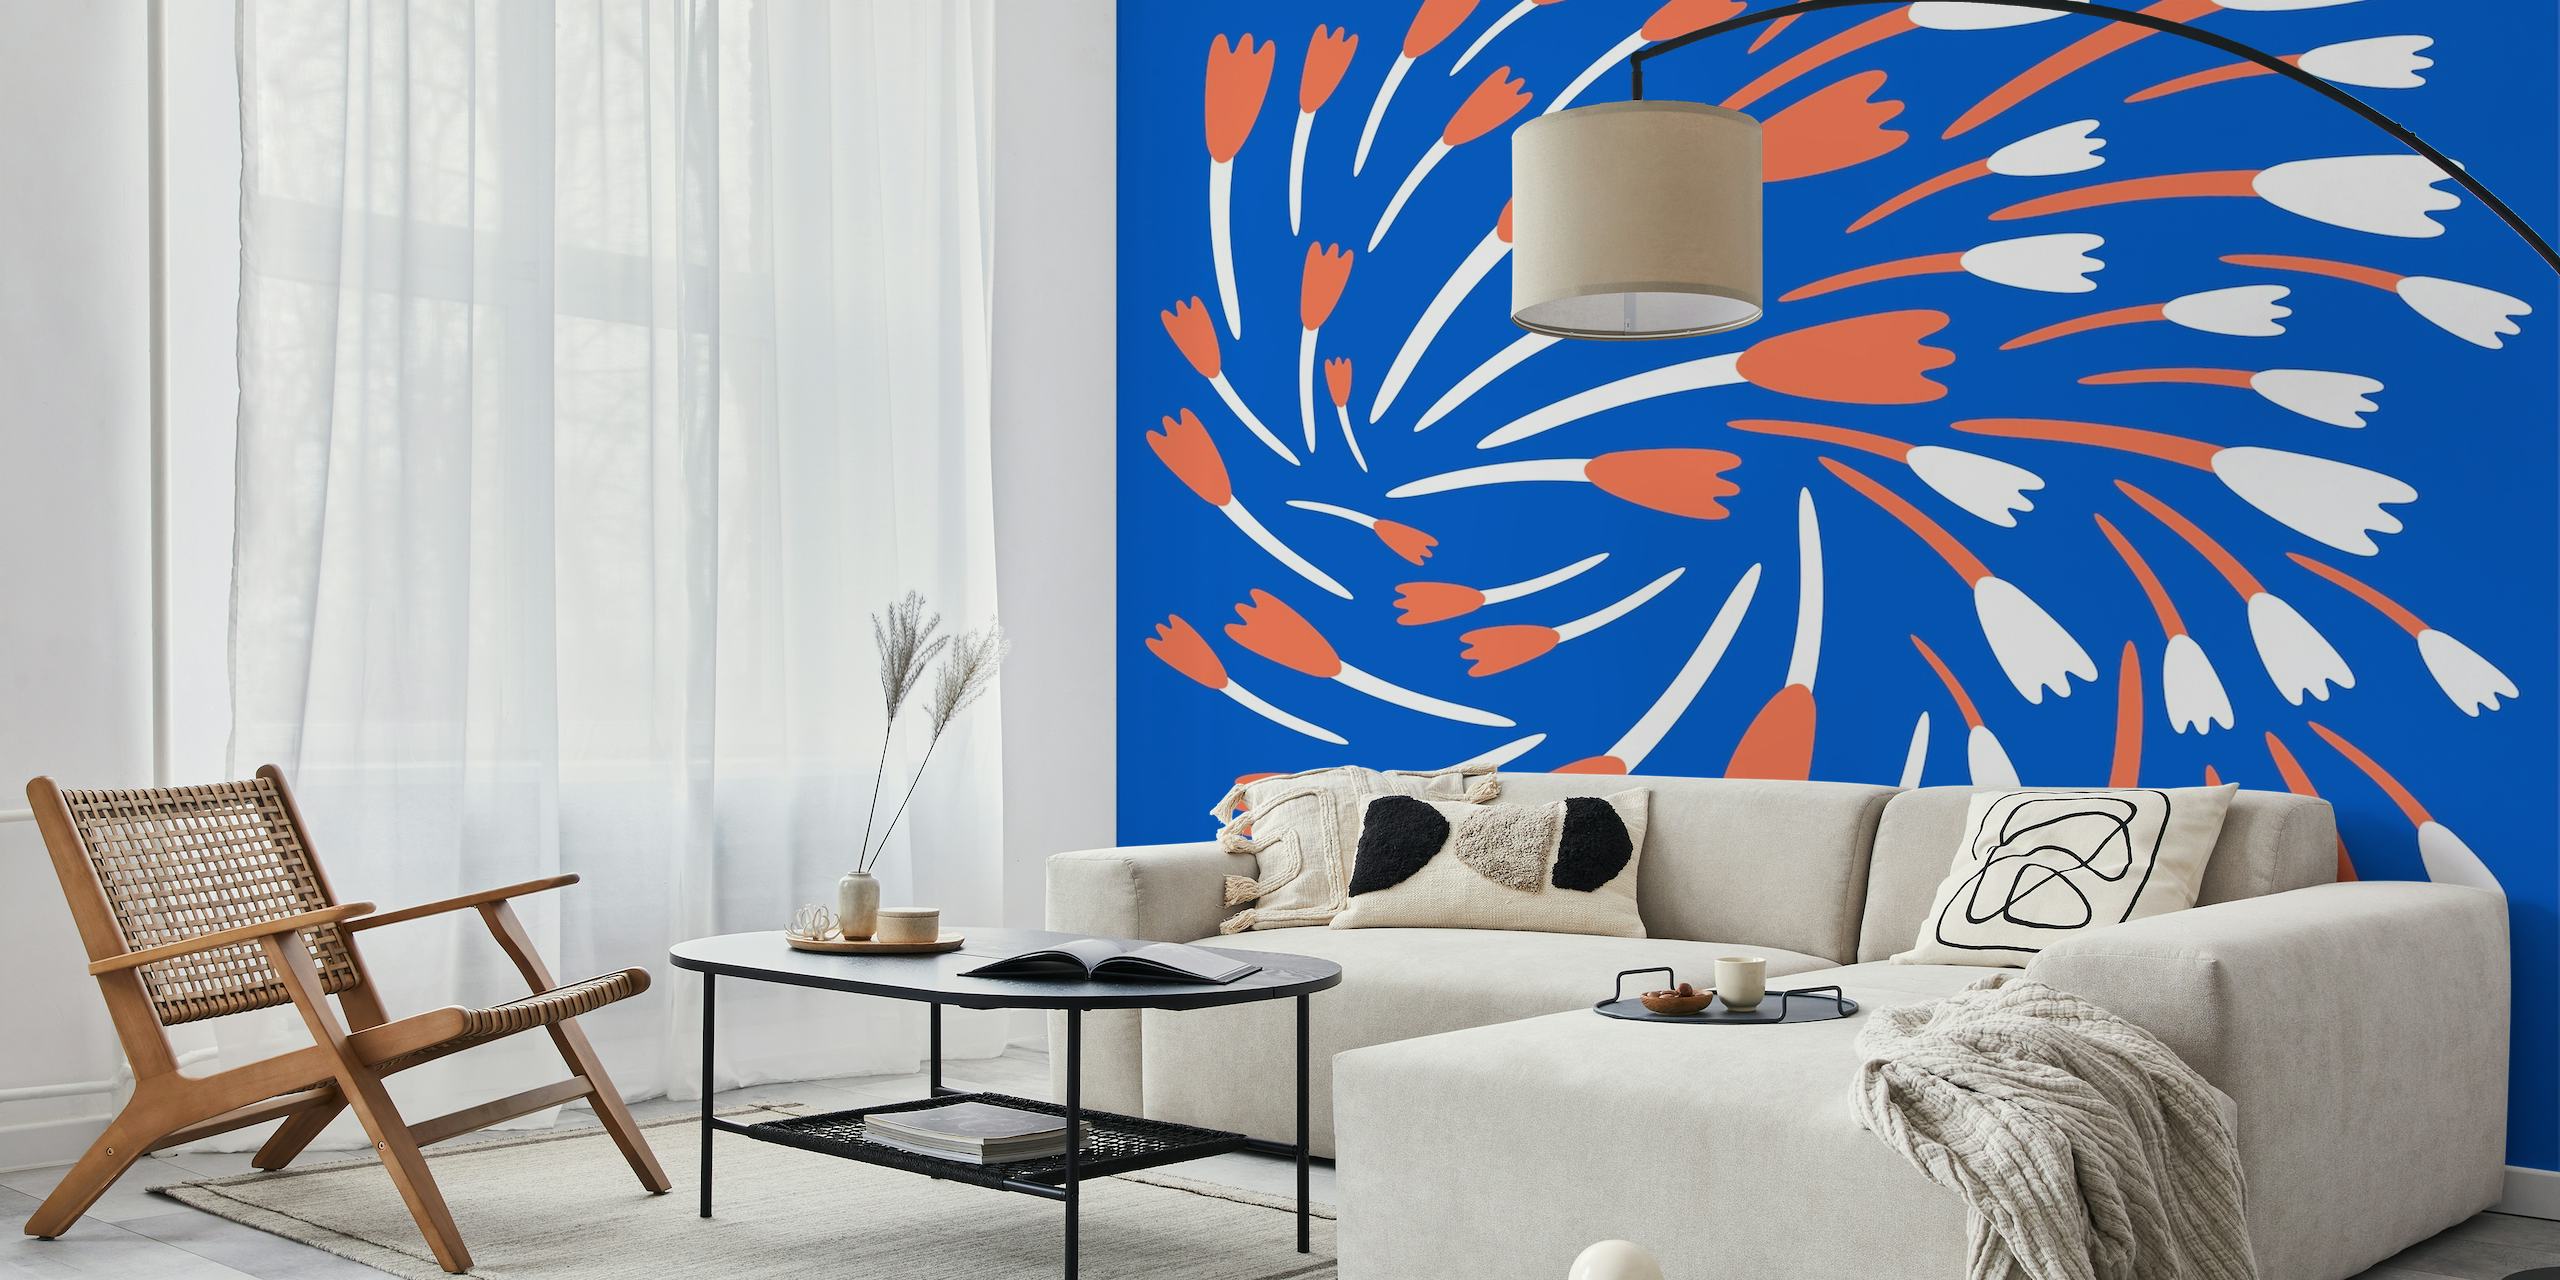 Floral Pattern in blue orange and white tapetit